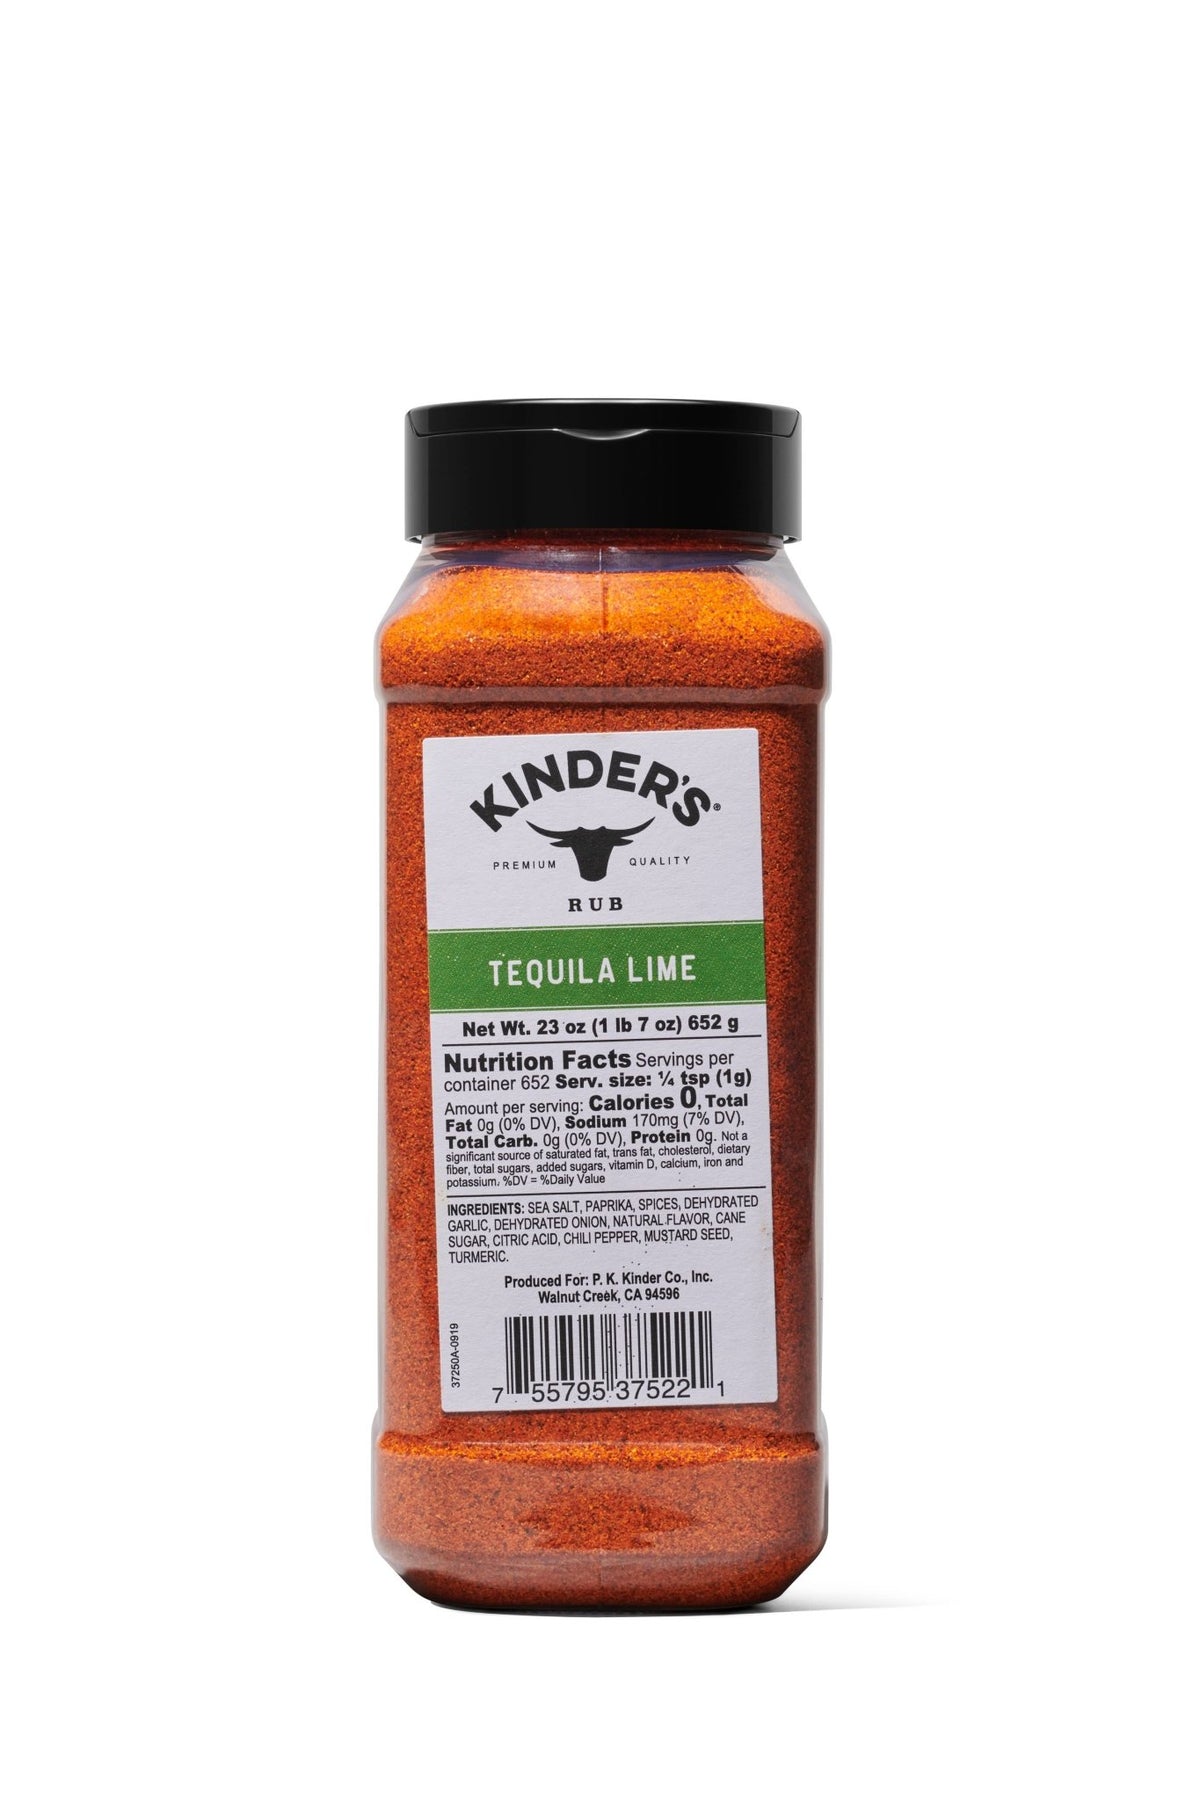 Kinder's Sauces & Seasonings - Tequila Lime Rub - Pacific Flyway Supplies